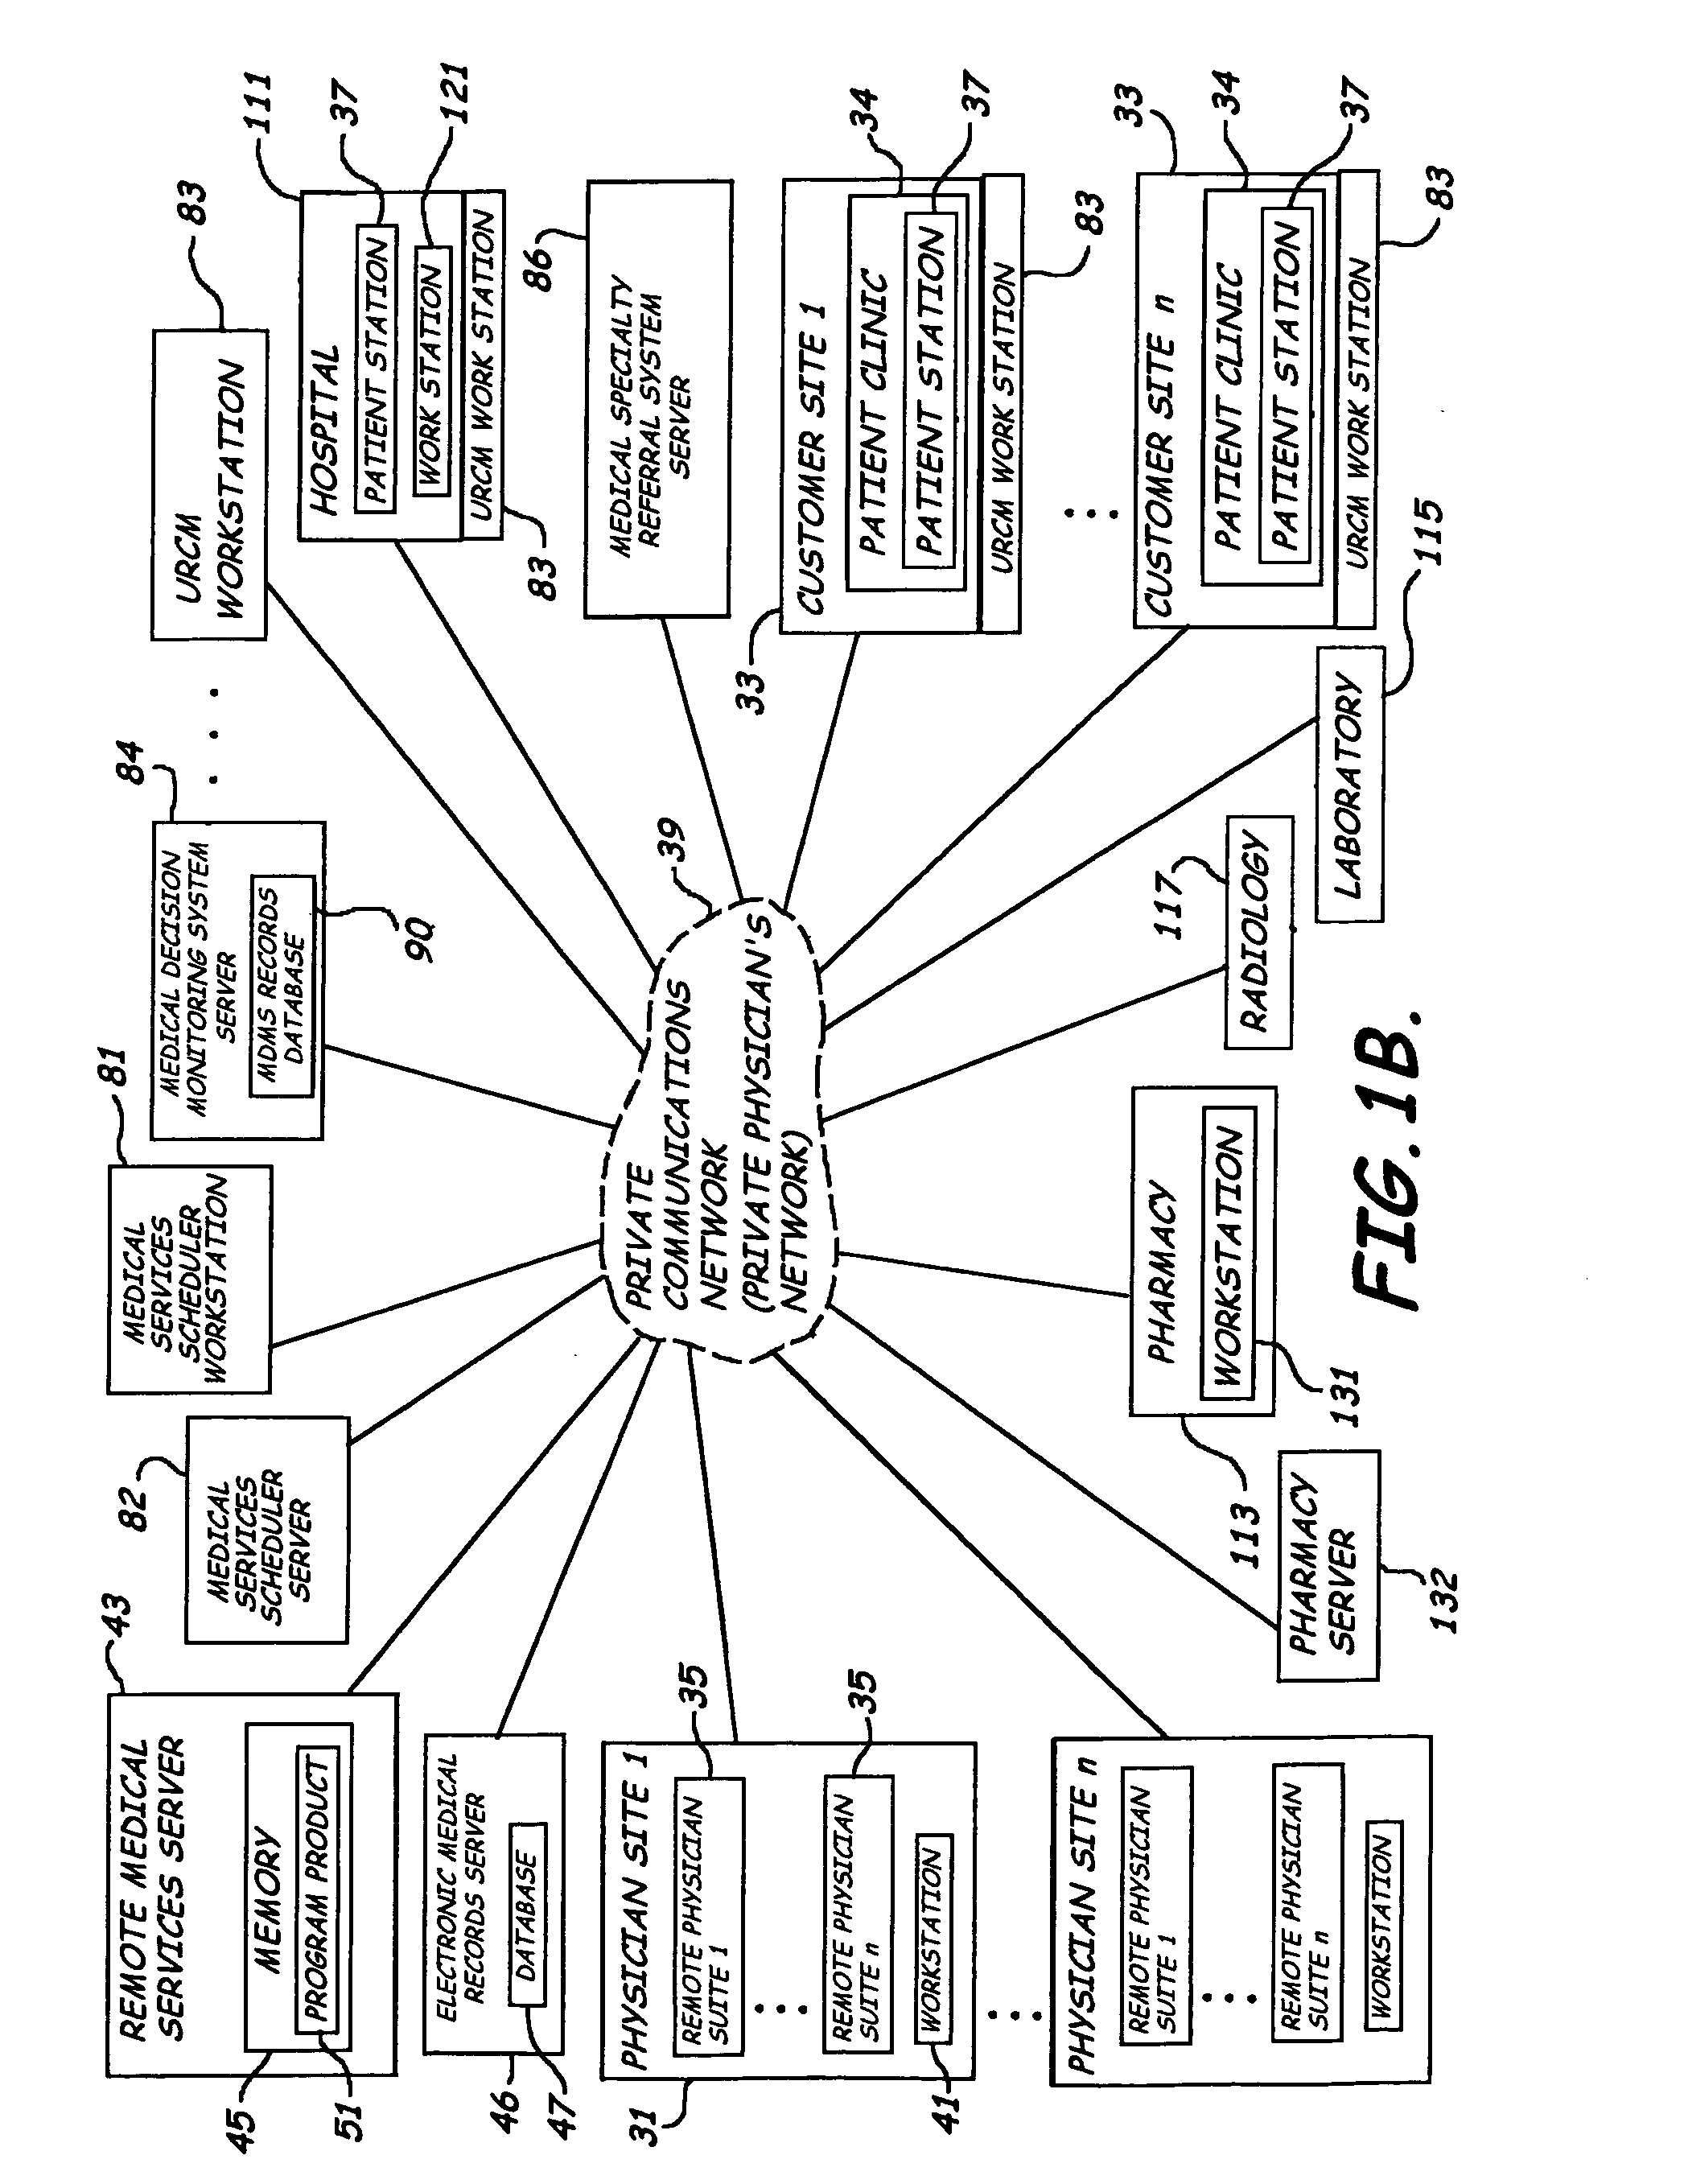 System, method and program product for delivering medical services from a remote location